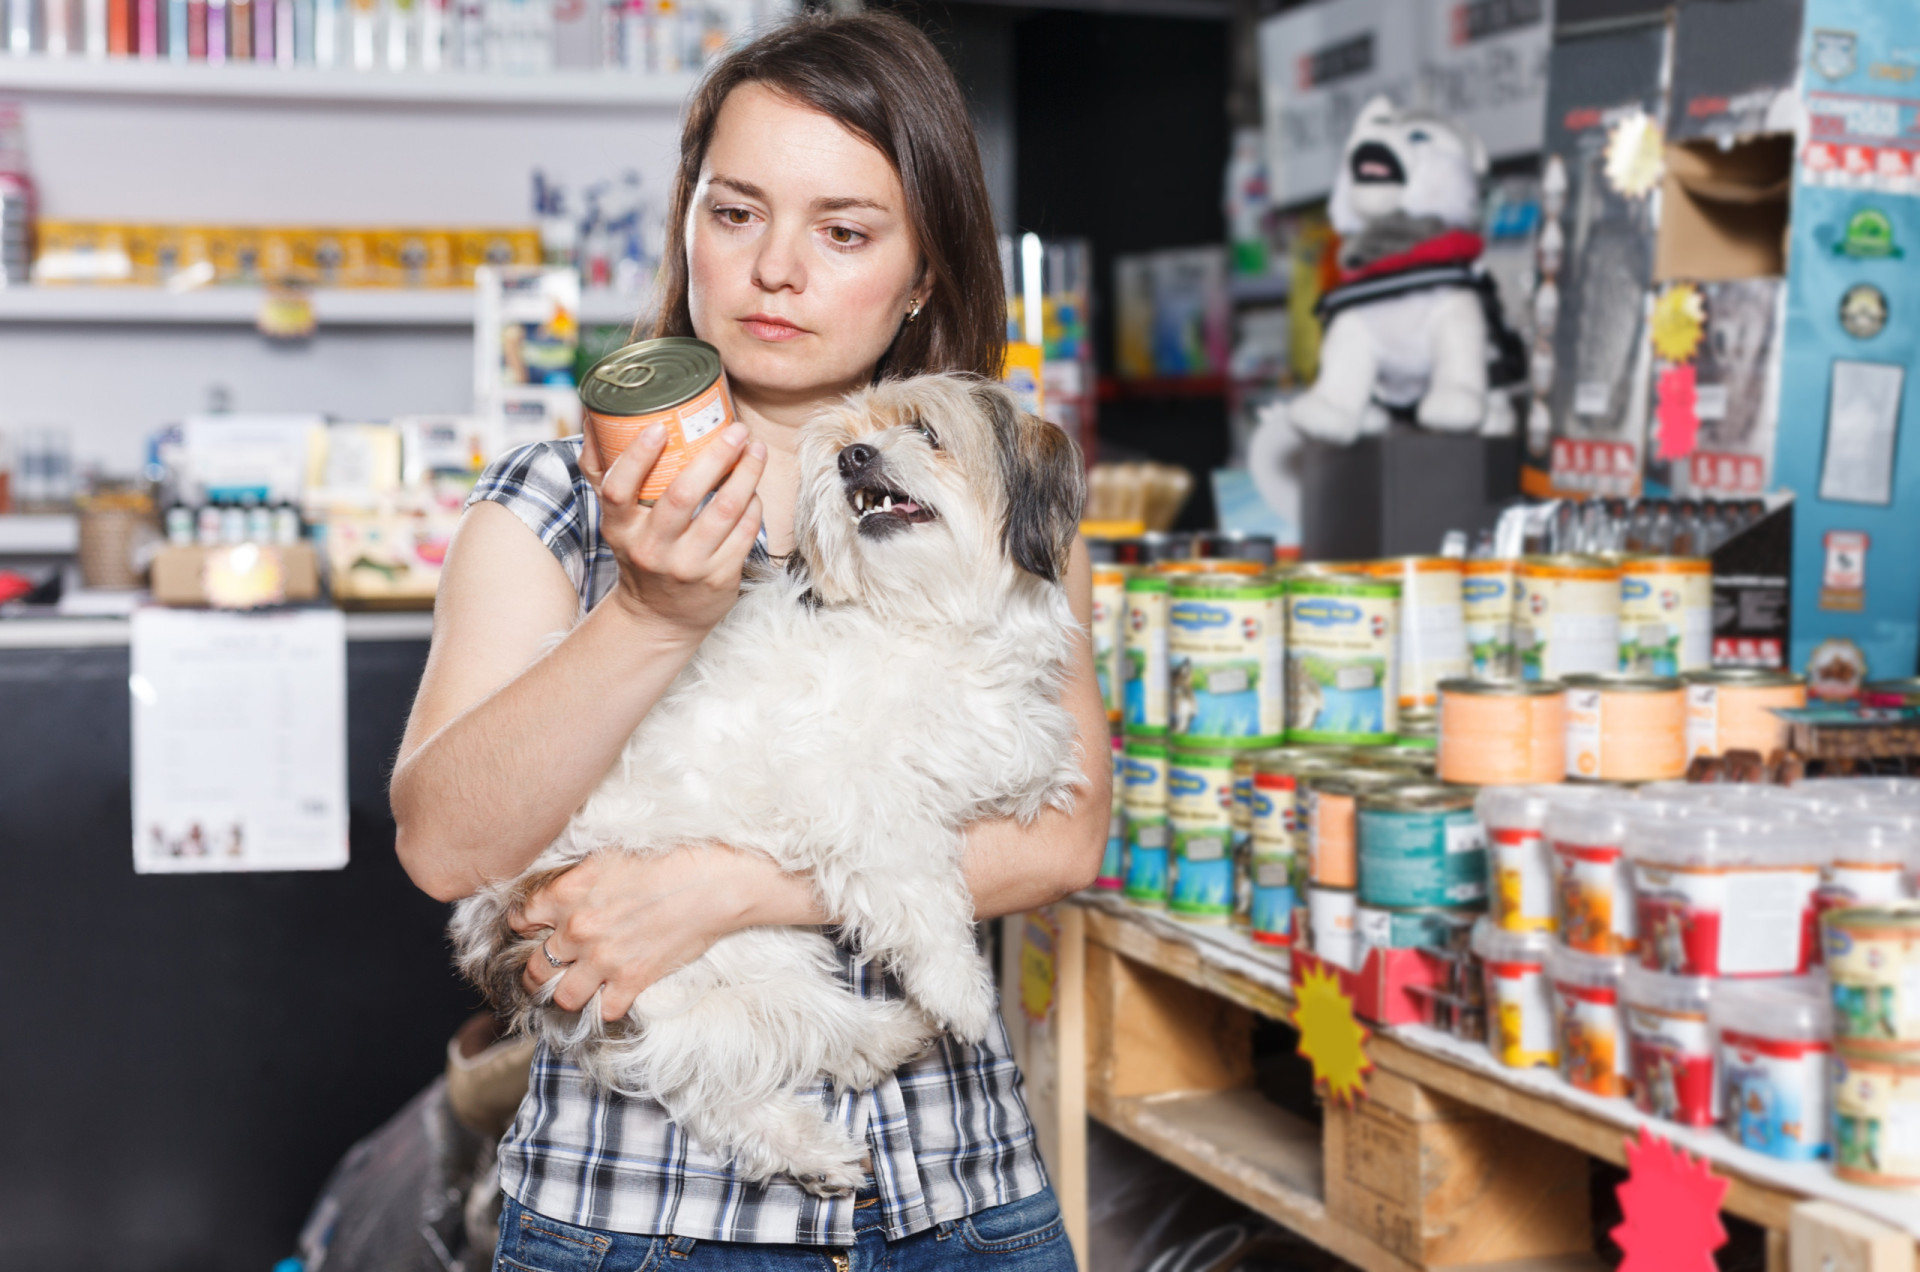 <p>This goes for any other pet. Of course, you had to go to the pet store to get some food.</p><p><a href="https://www.msn.com/en-us/community/channel/vid-7xx8mnucu55yw63we9va2gwr7uihbxwc68fxqp25x6tg4ftibpra?cvid=94631541bc0f4f89bfd59158d696ad7e">Follow us and access great exclusive content every day</a></p>